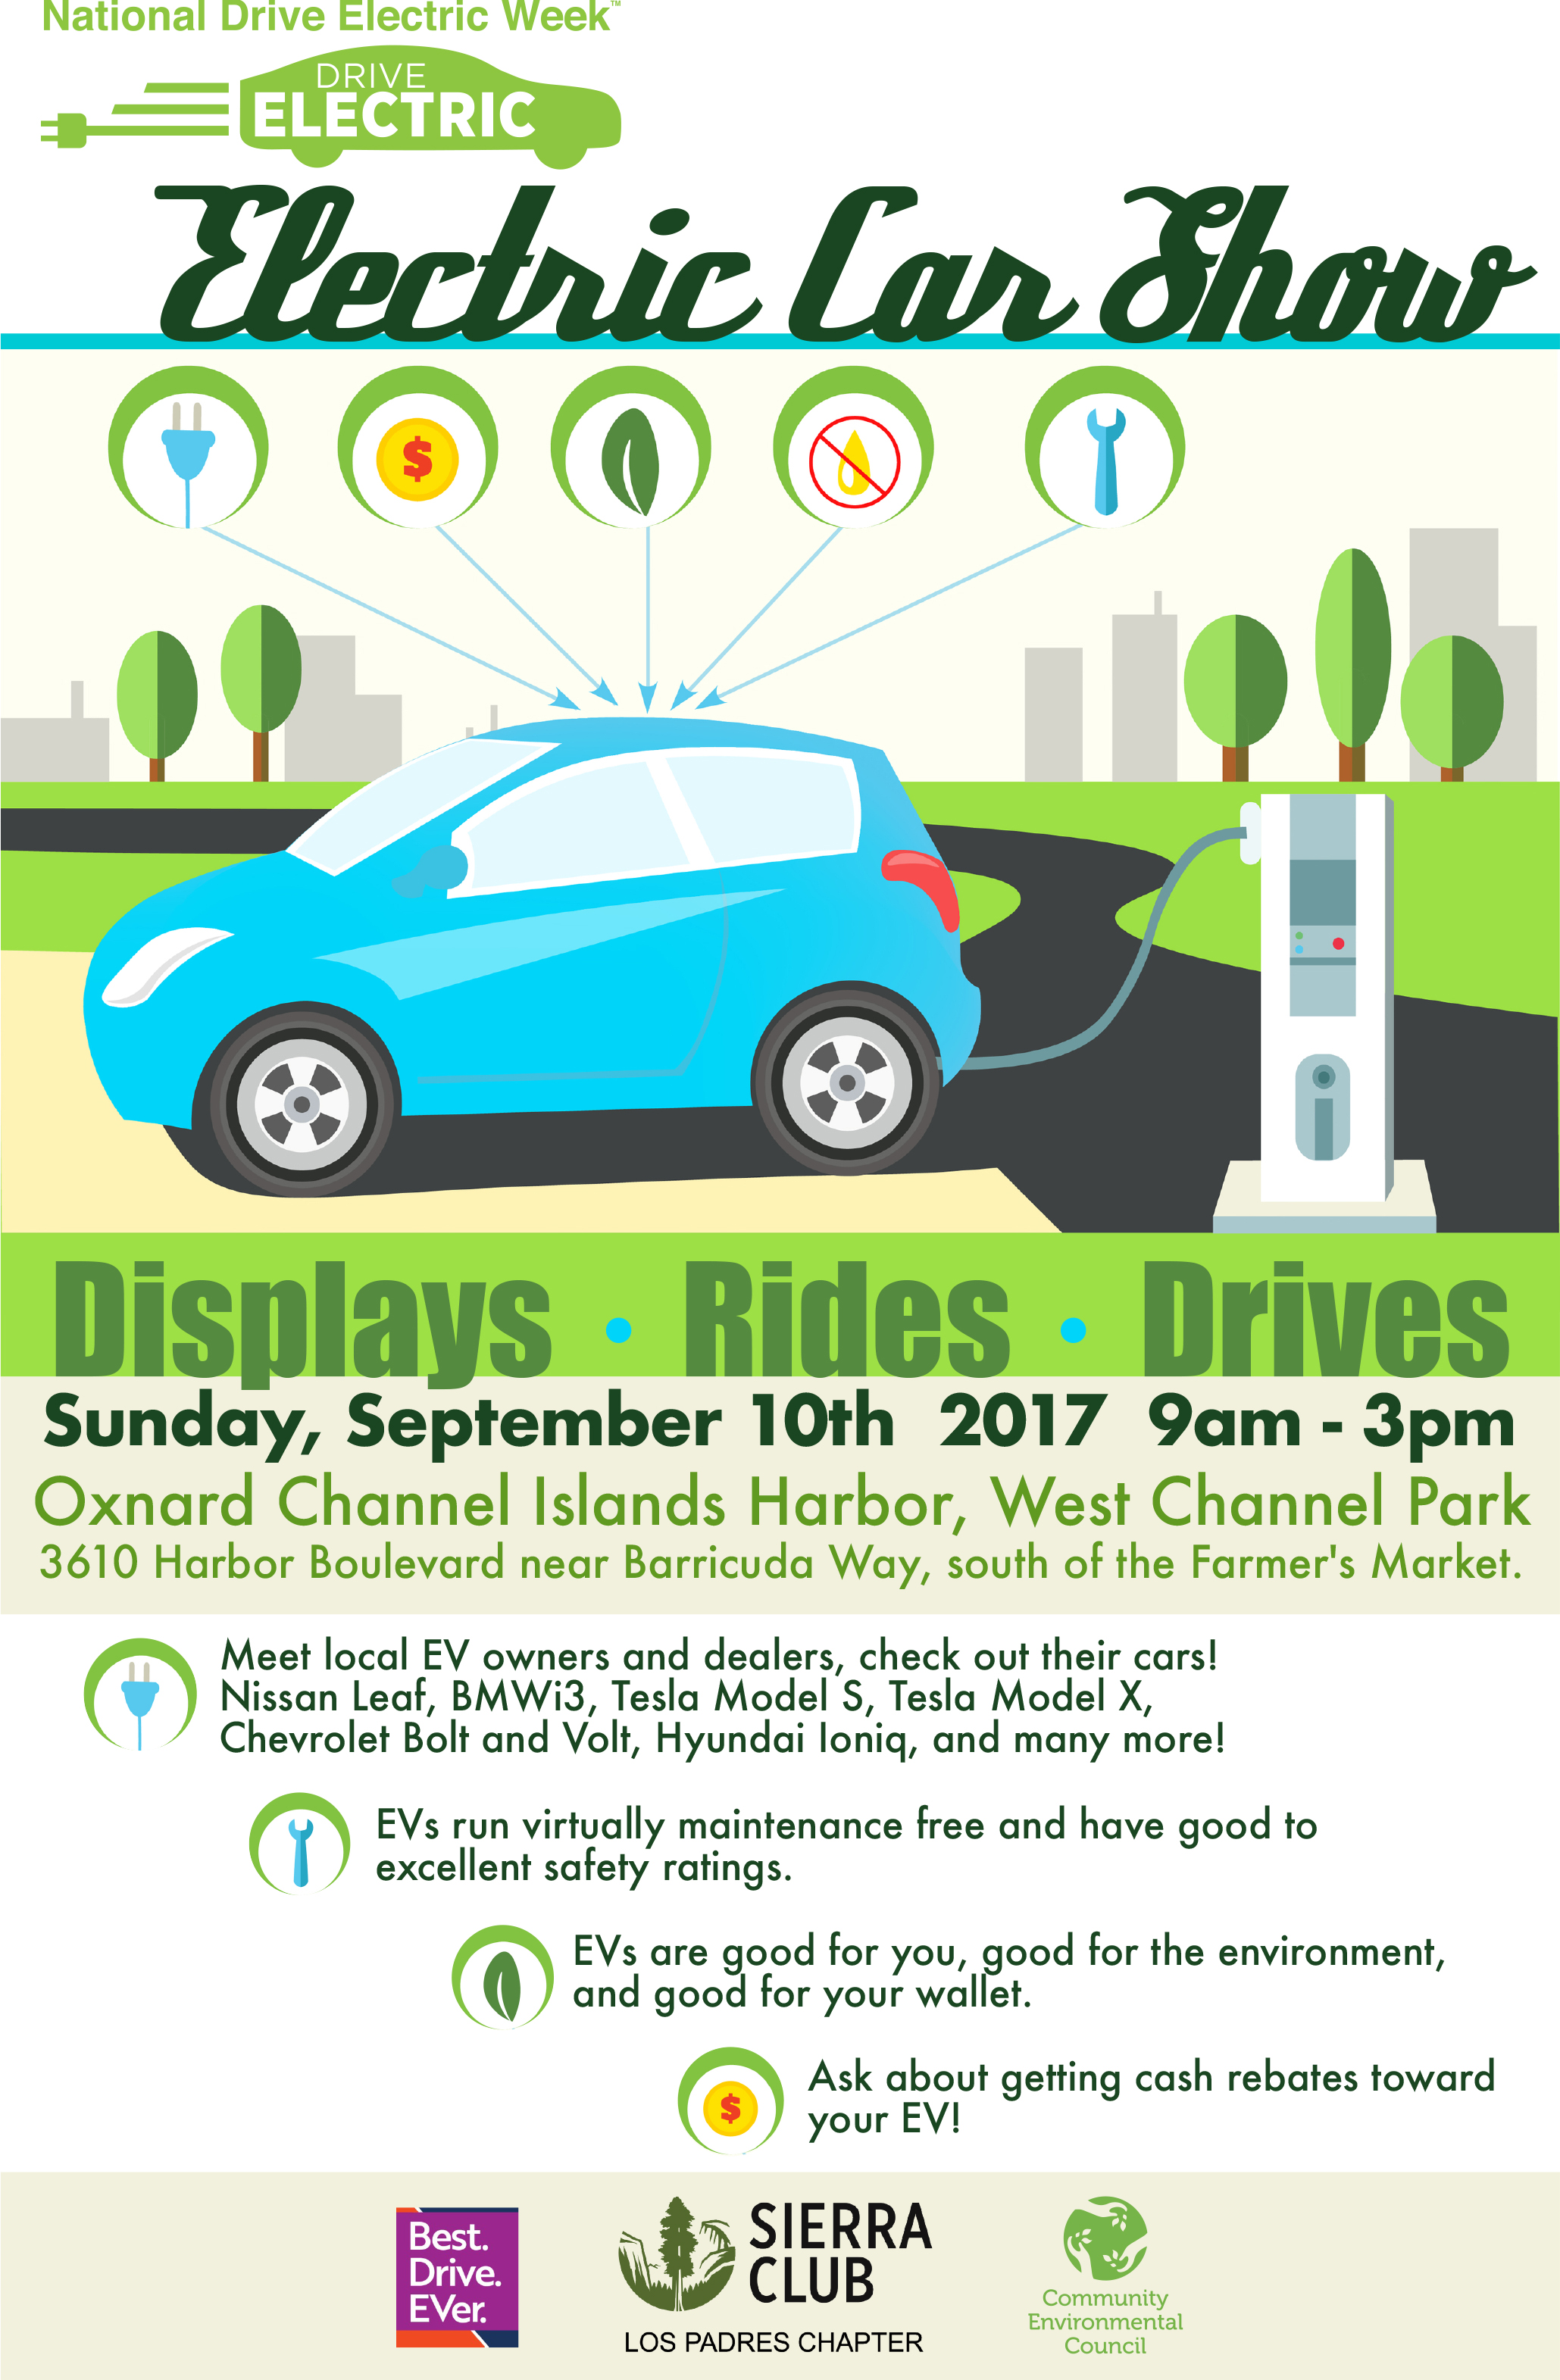 National Drive Electric Week Flyer